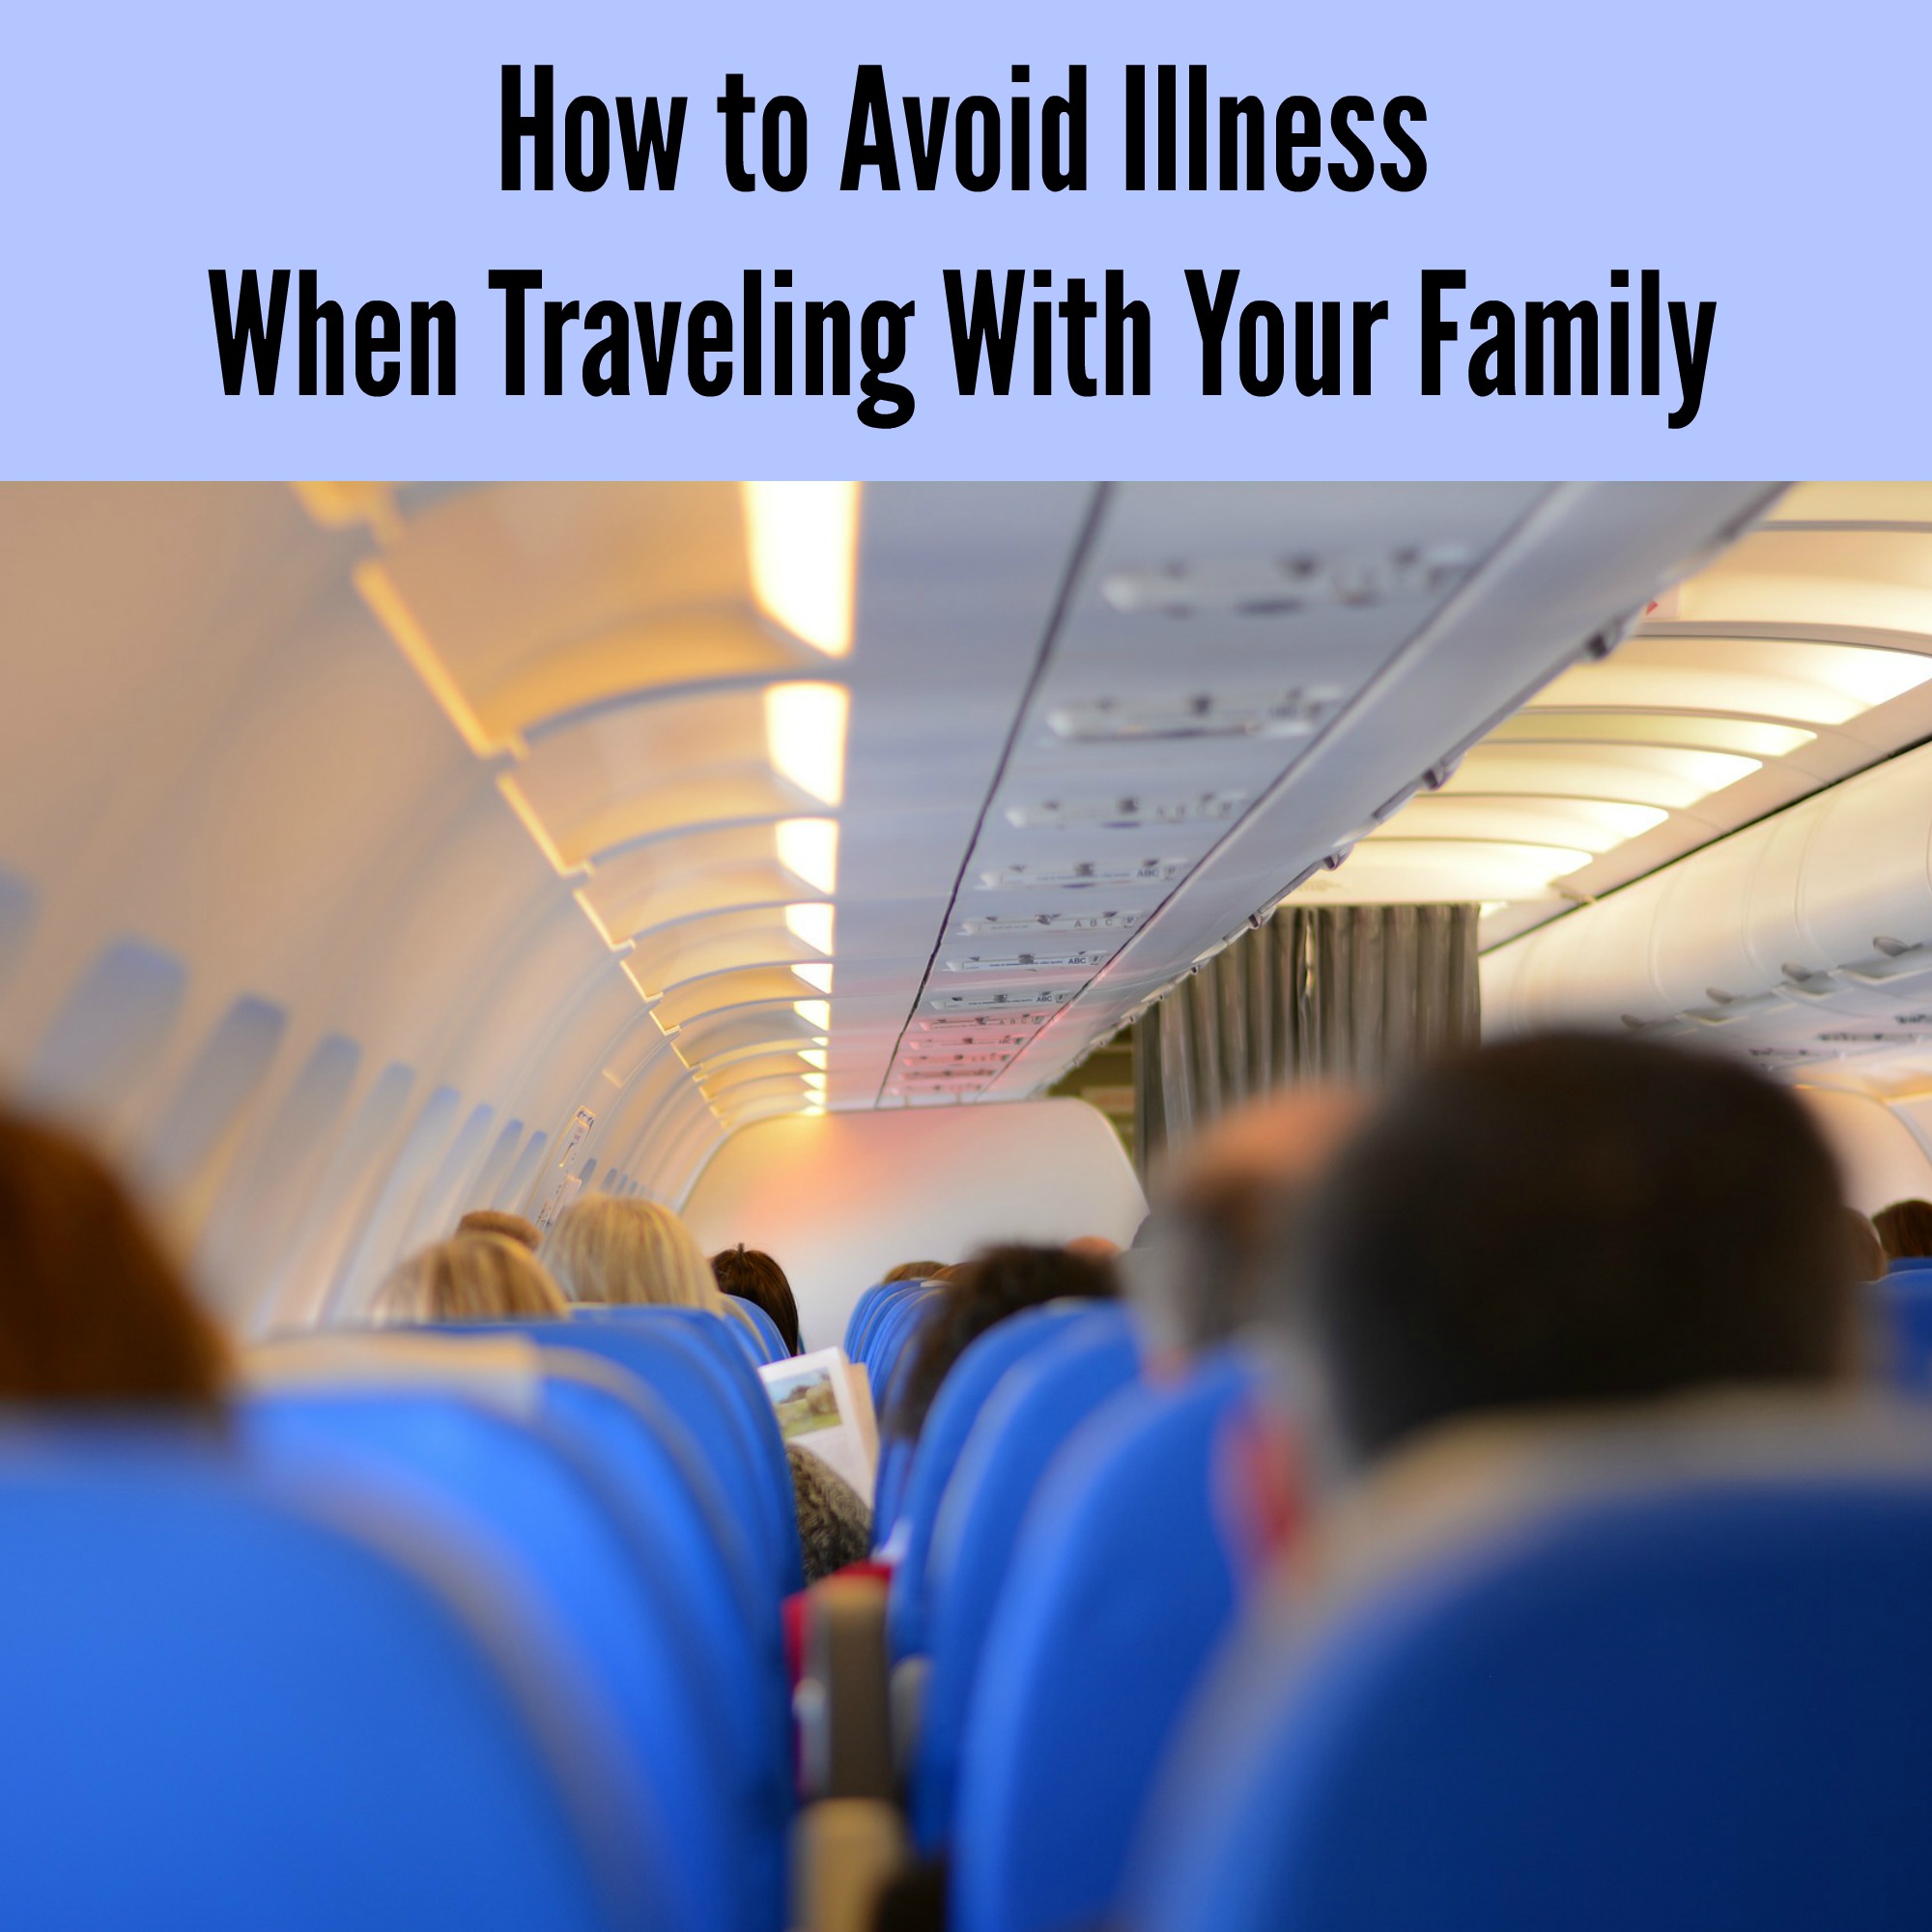 How to Avoid Illness When Traveling With Your Family